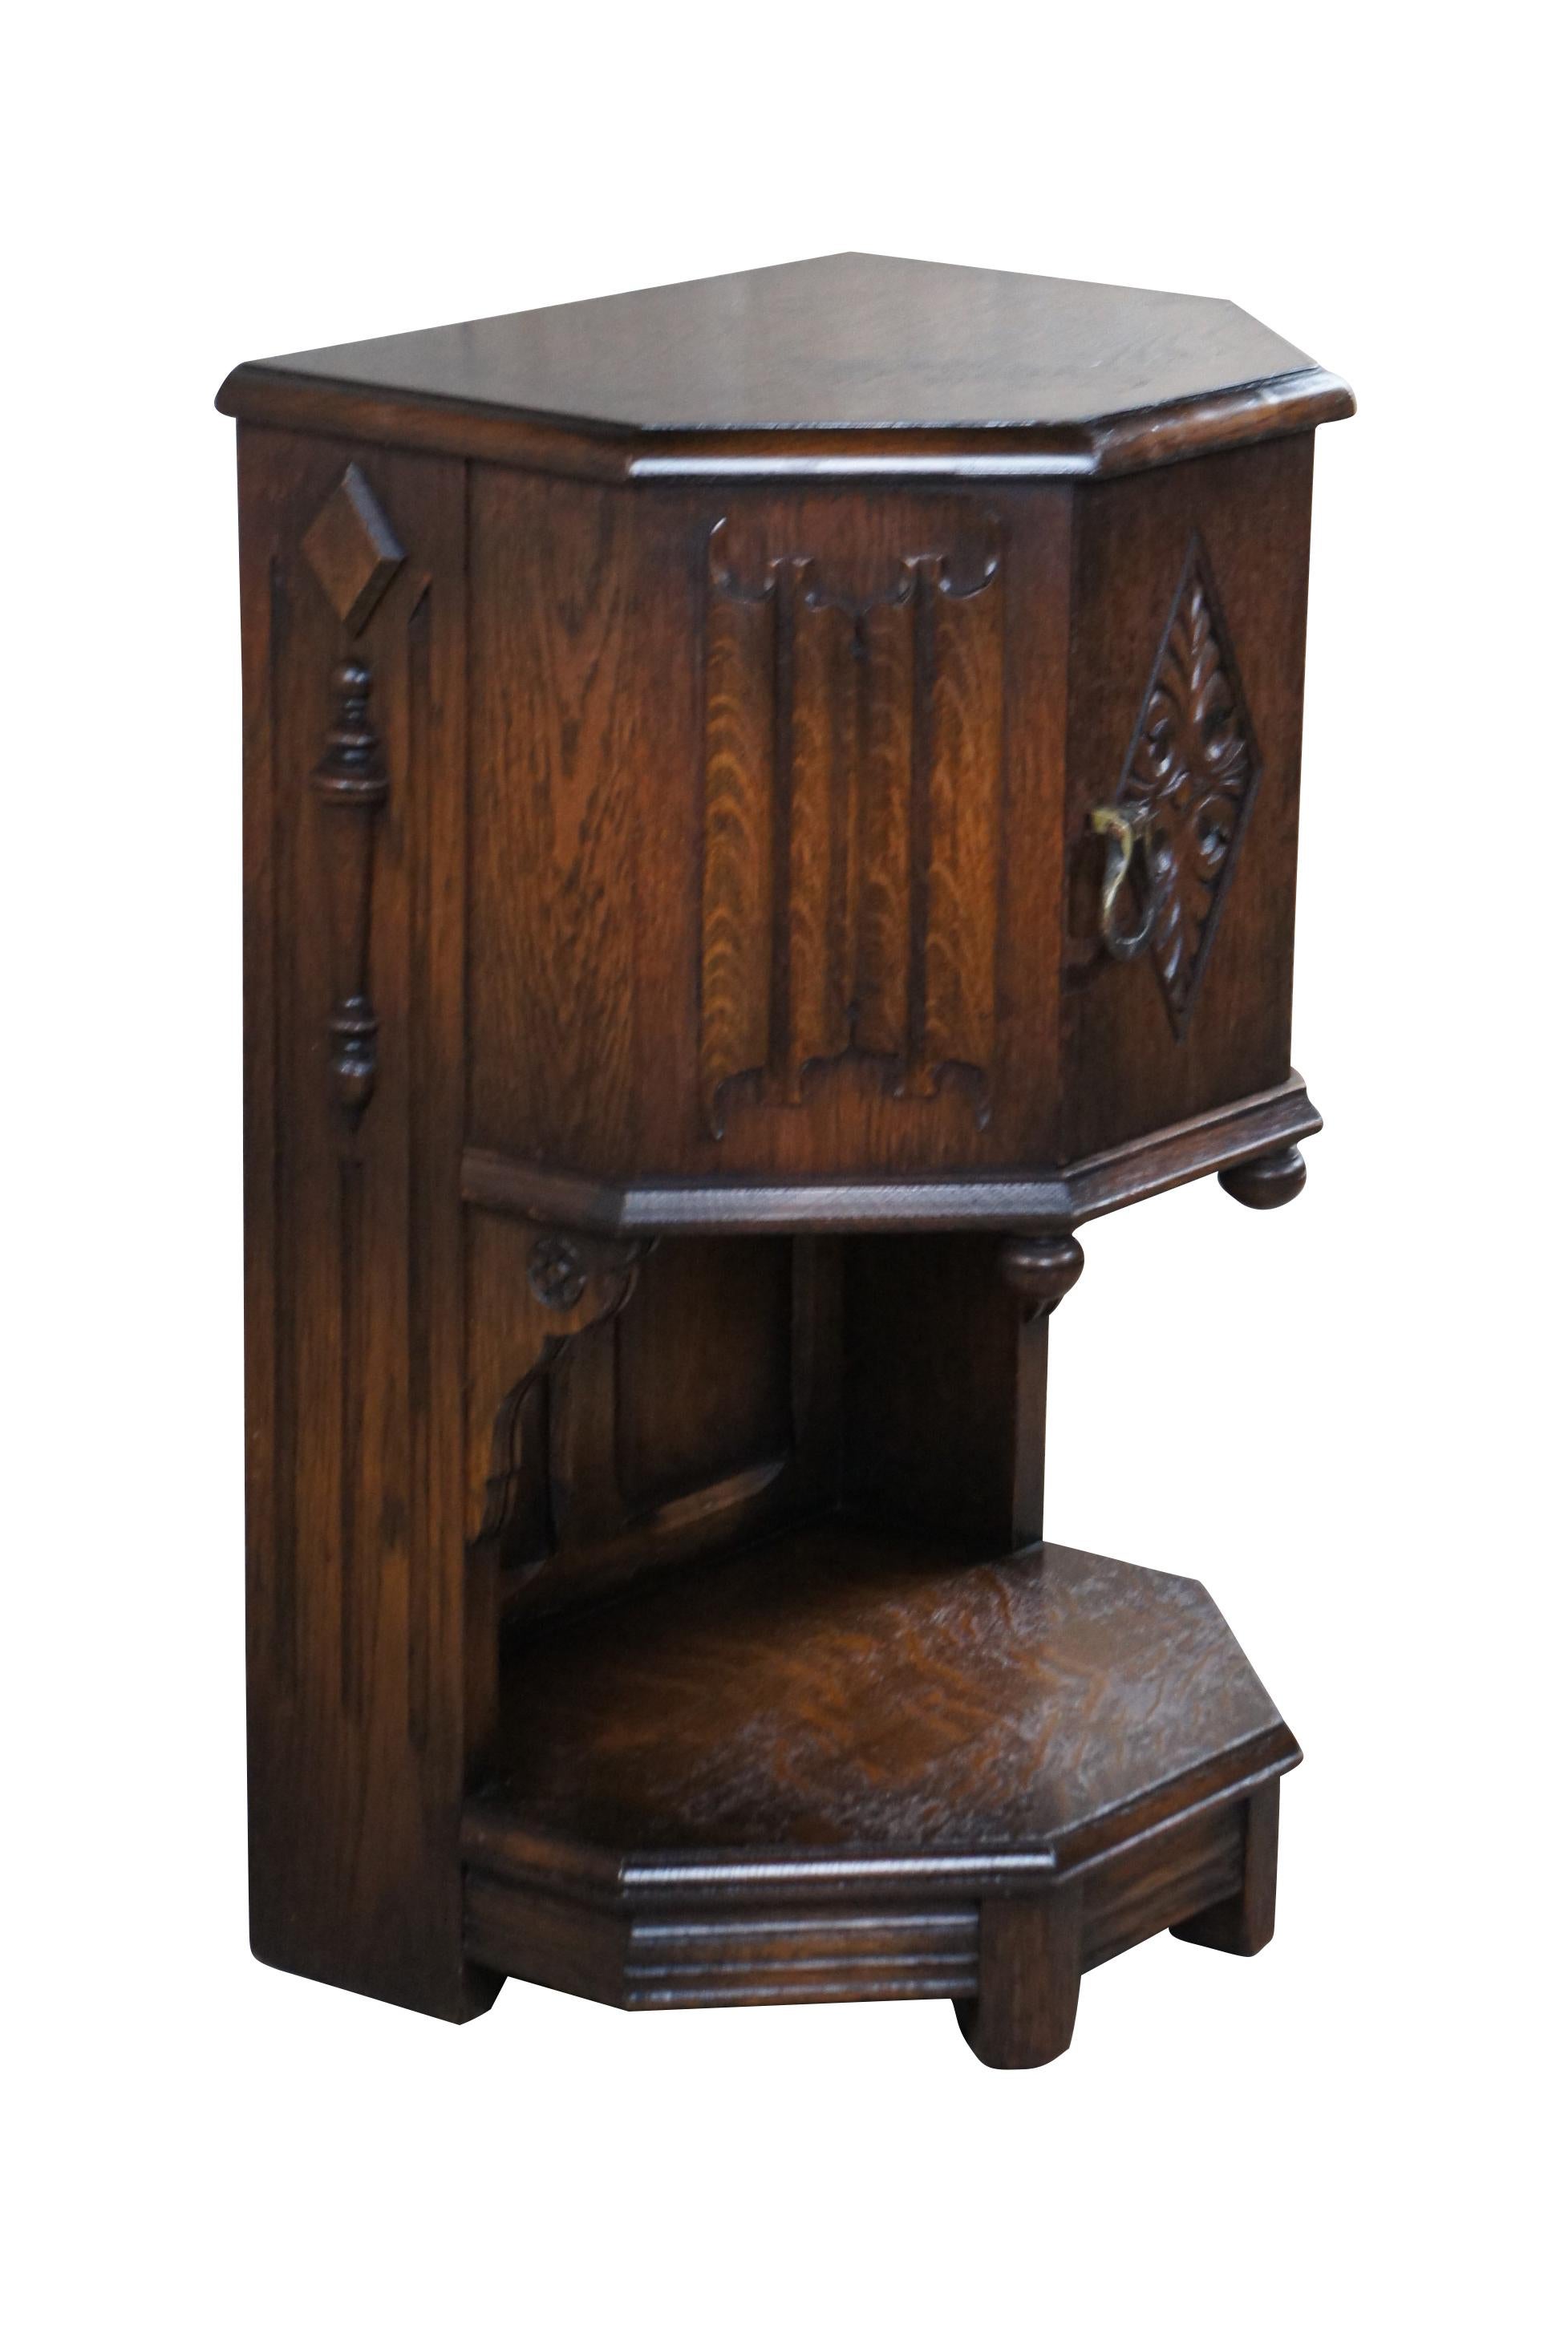 An impressive Spanish or Gothic Revival bedside table by Saginaw Furniture, circa late 1930s to early 40s. Made from oak with intriguing linen fold and diamond pattern acanthus carved accents.  Sides are accented by quarter cut turned and applied